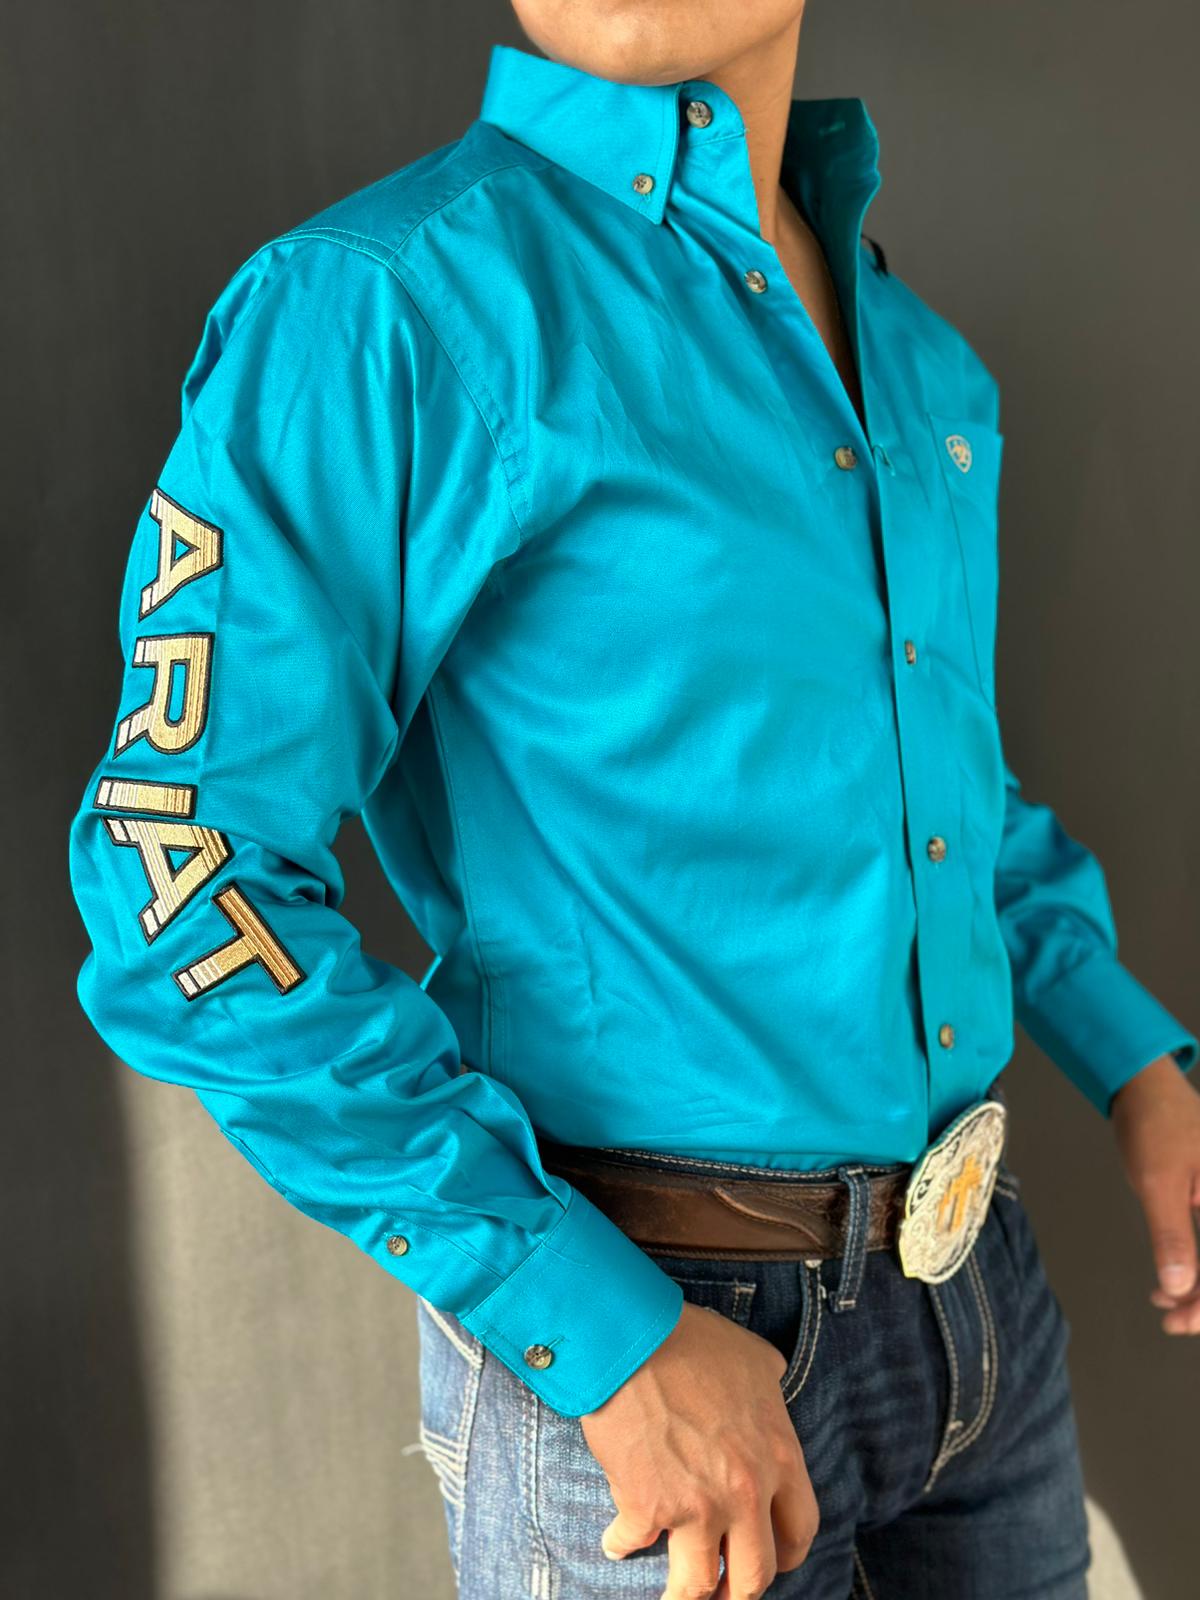 Ariat shirt team logo deep fitted  turquoise